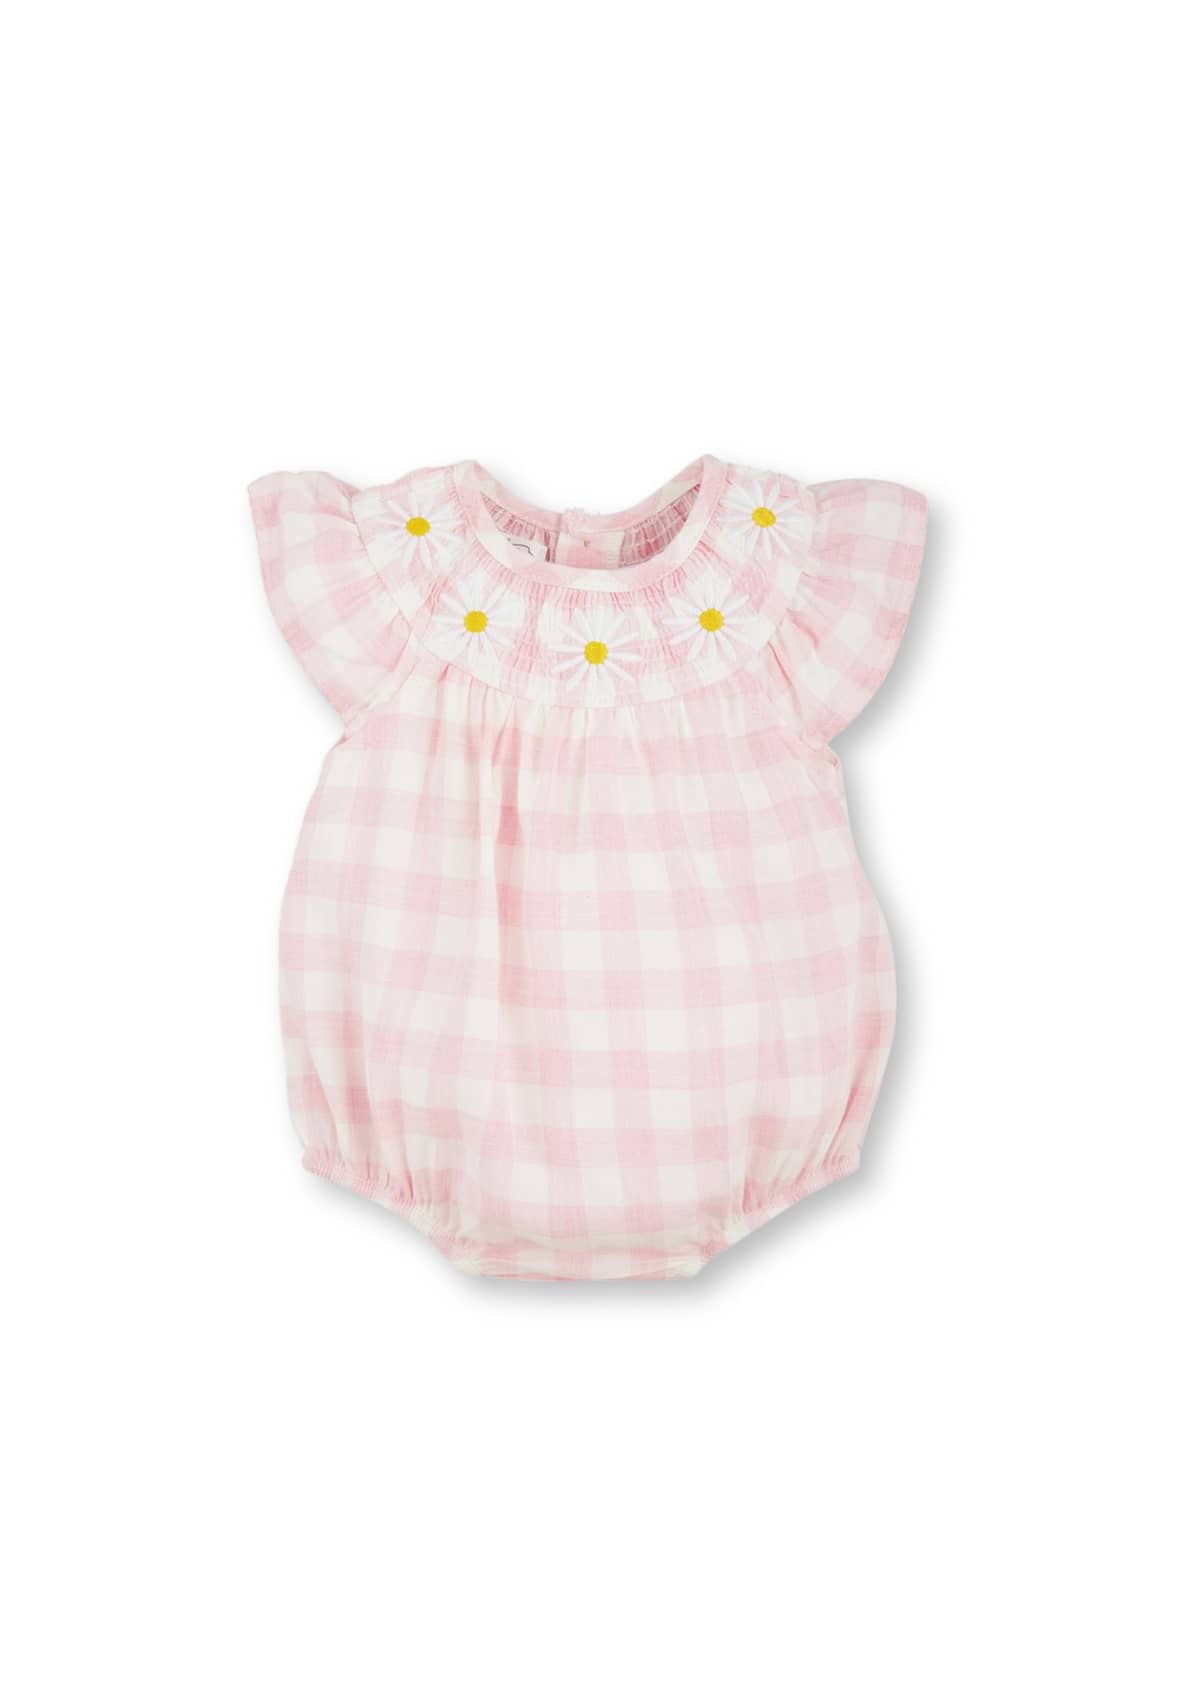 Clothing For the Littles-New Clothing For the Littles--Ruby Jane.